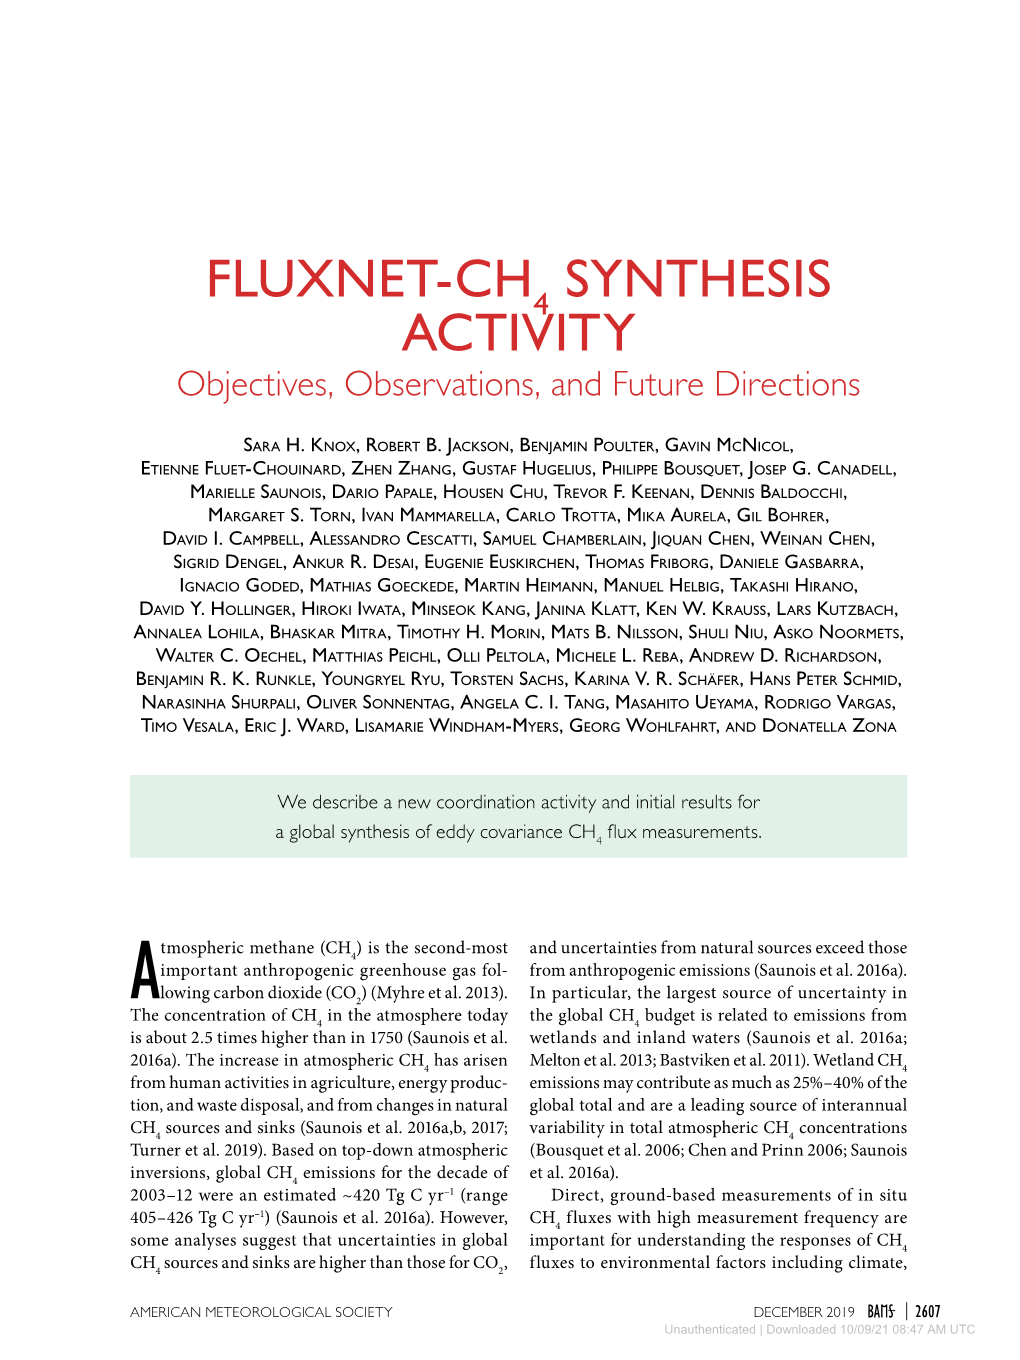 Fluxnet-Ch Synthesis Activity